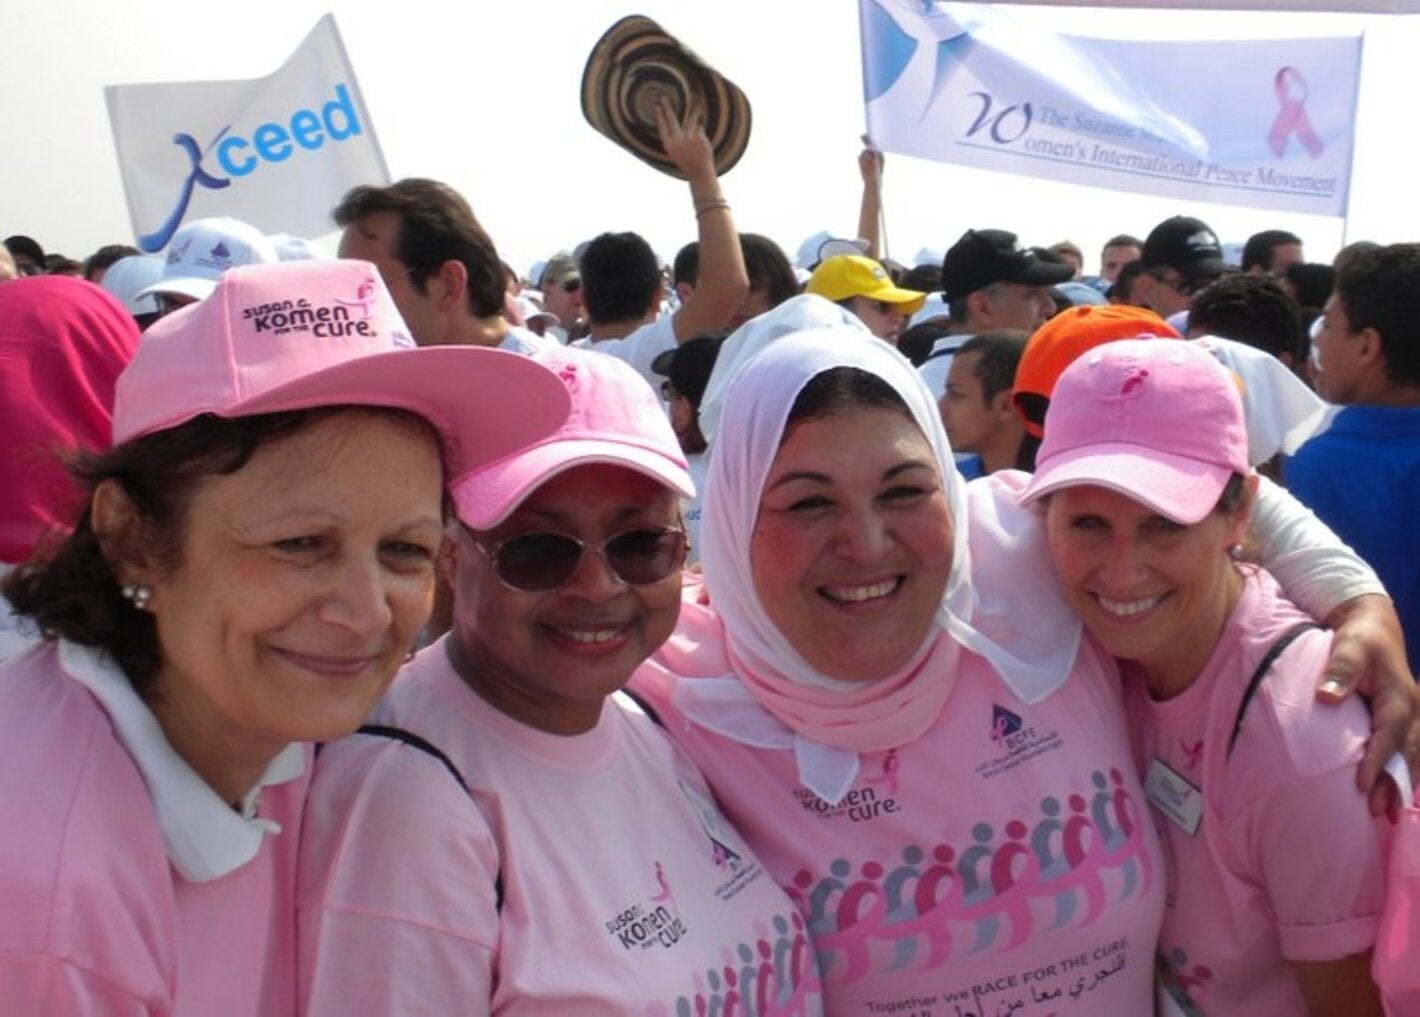 A group of four women dressed in pink t shirts embrace each other smiling. In the background other people is gathering with some banners on a breast cancer awarenes event